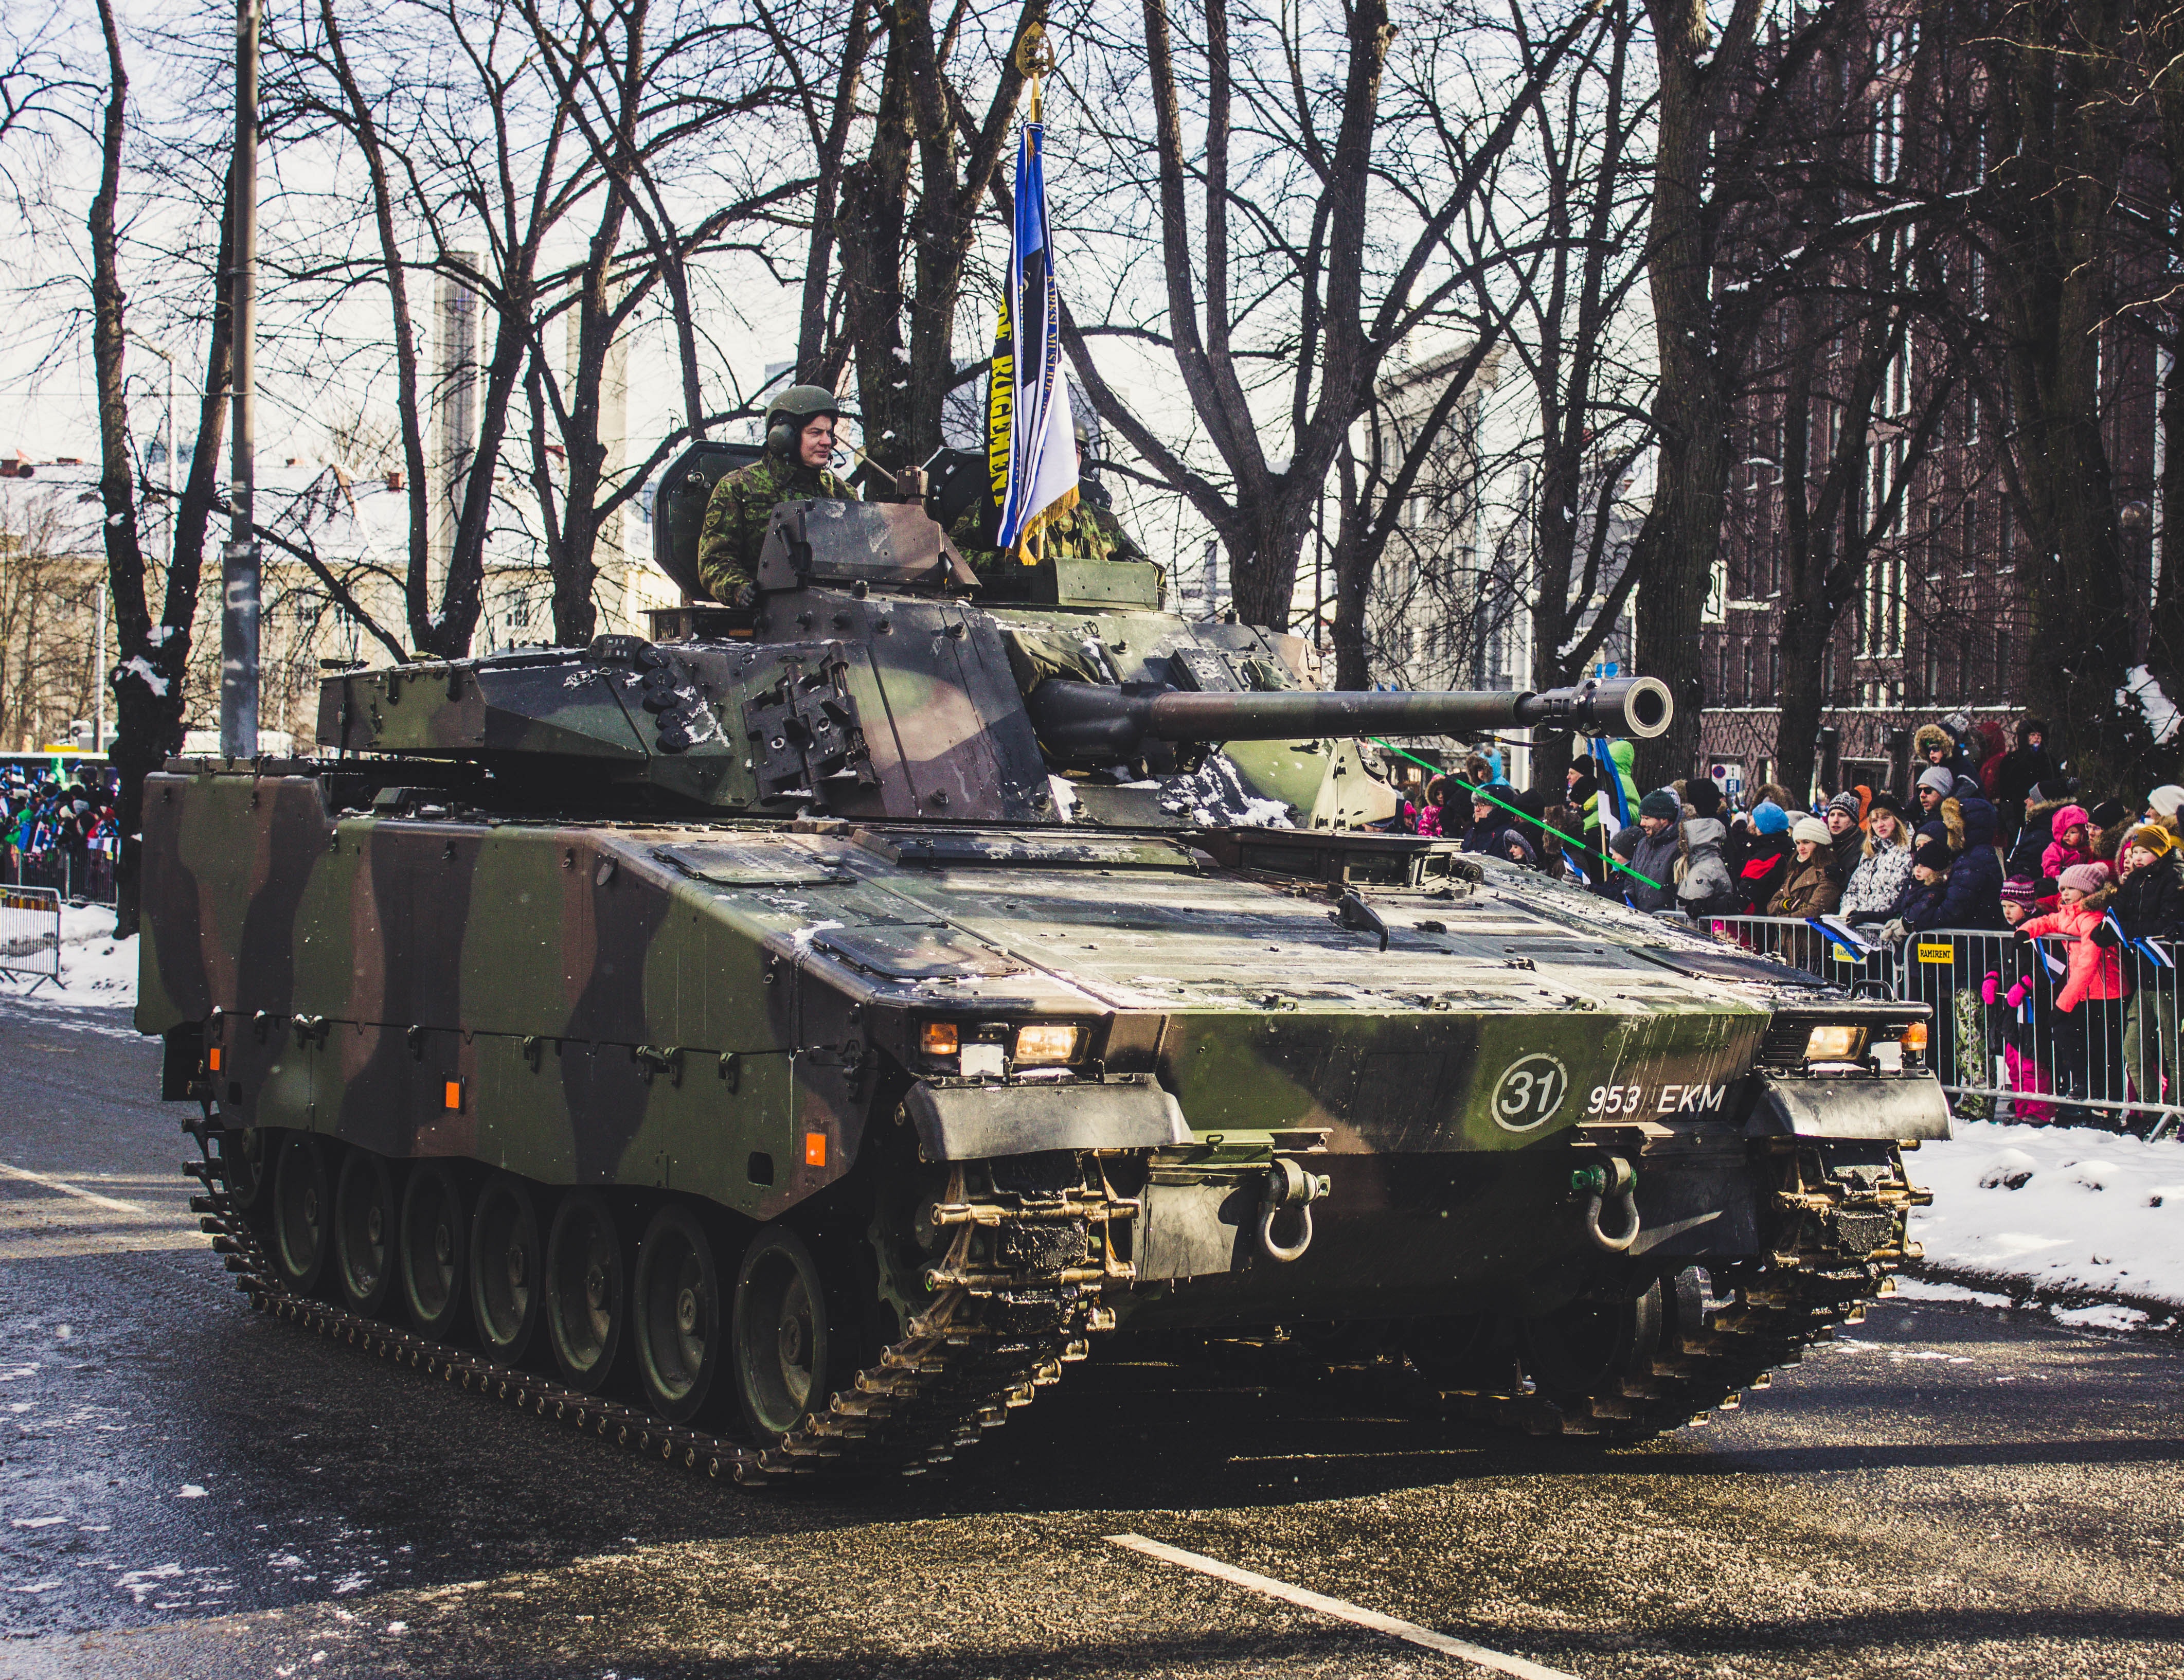 Black and green camouflage military tank parade photo